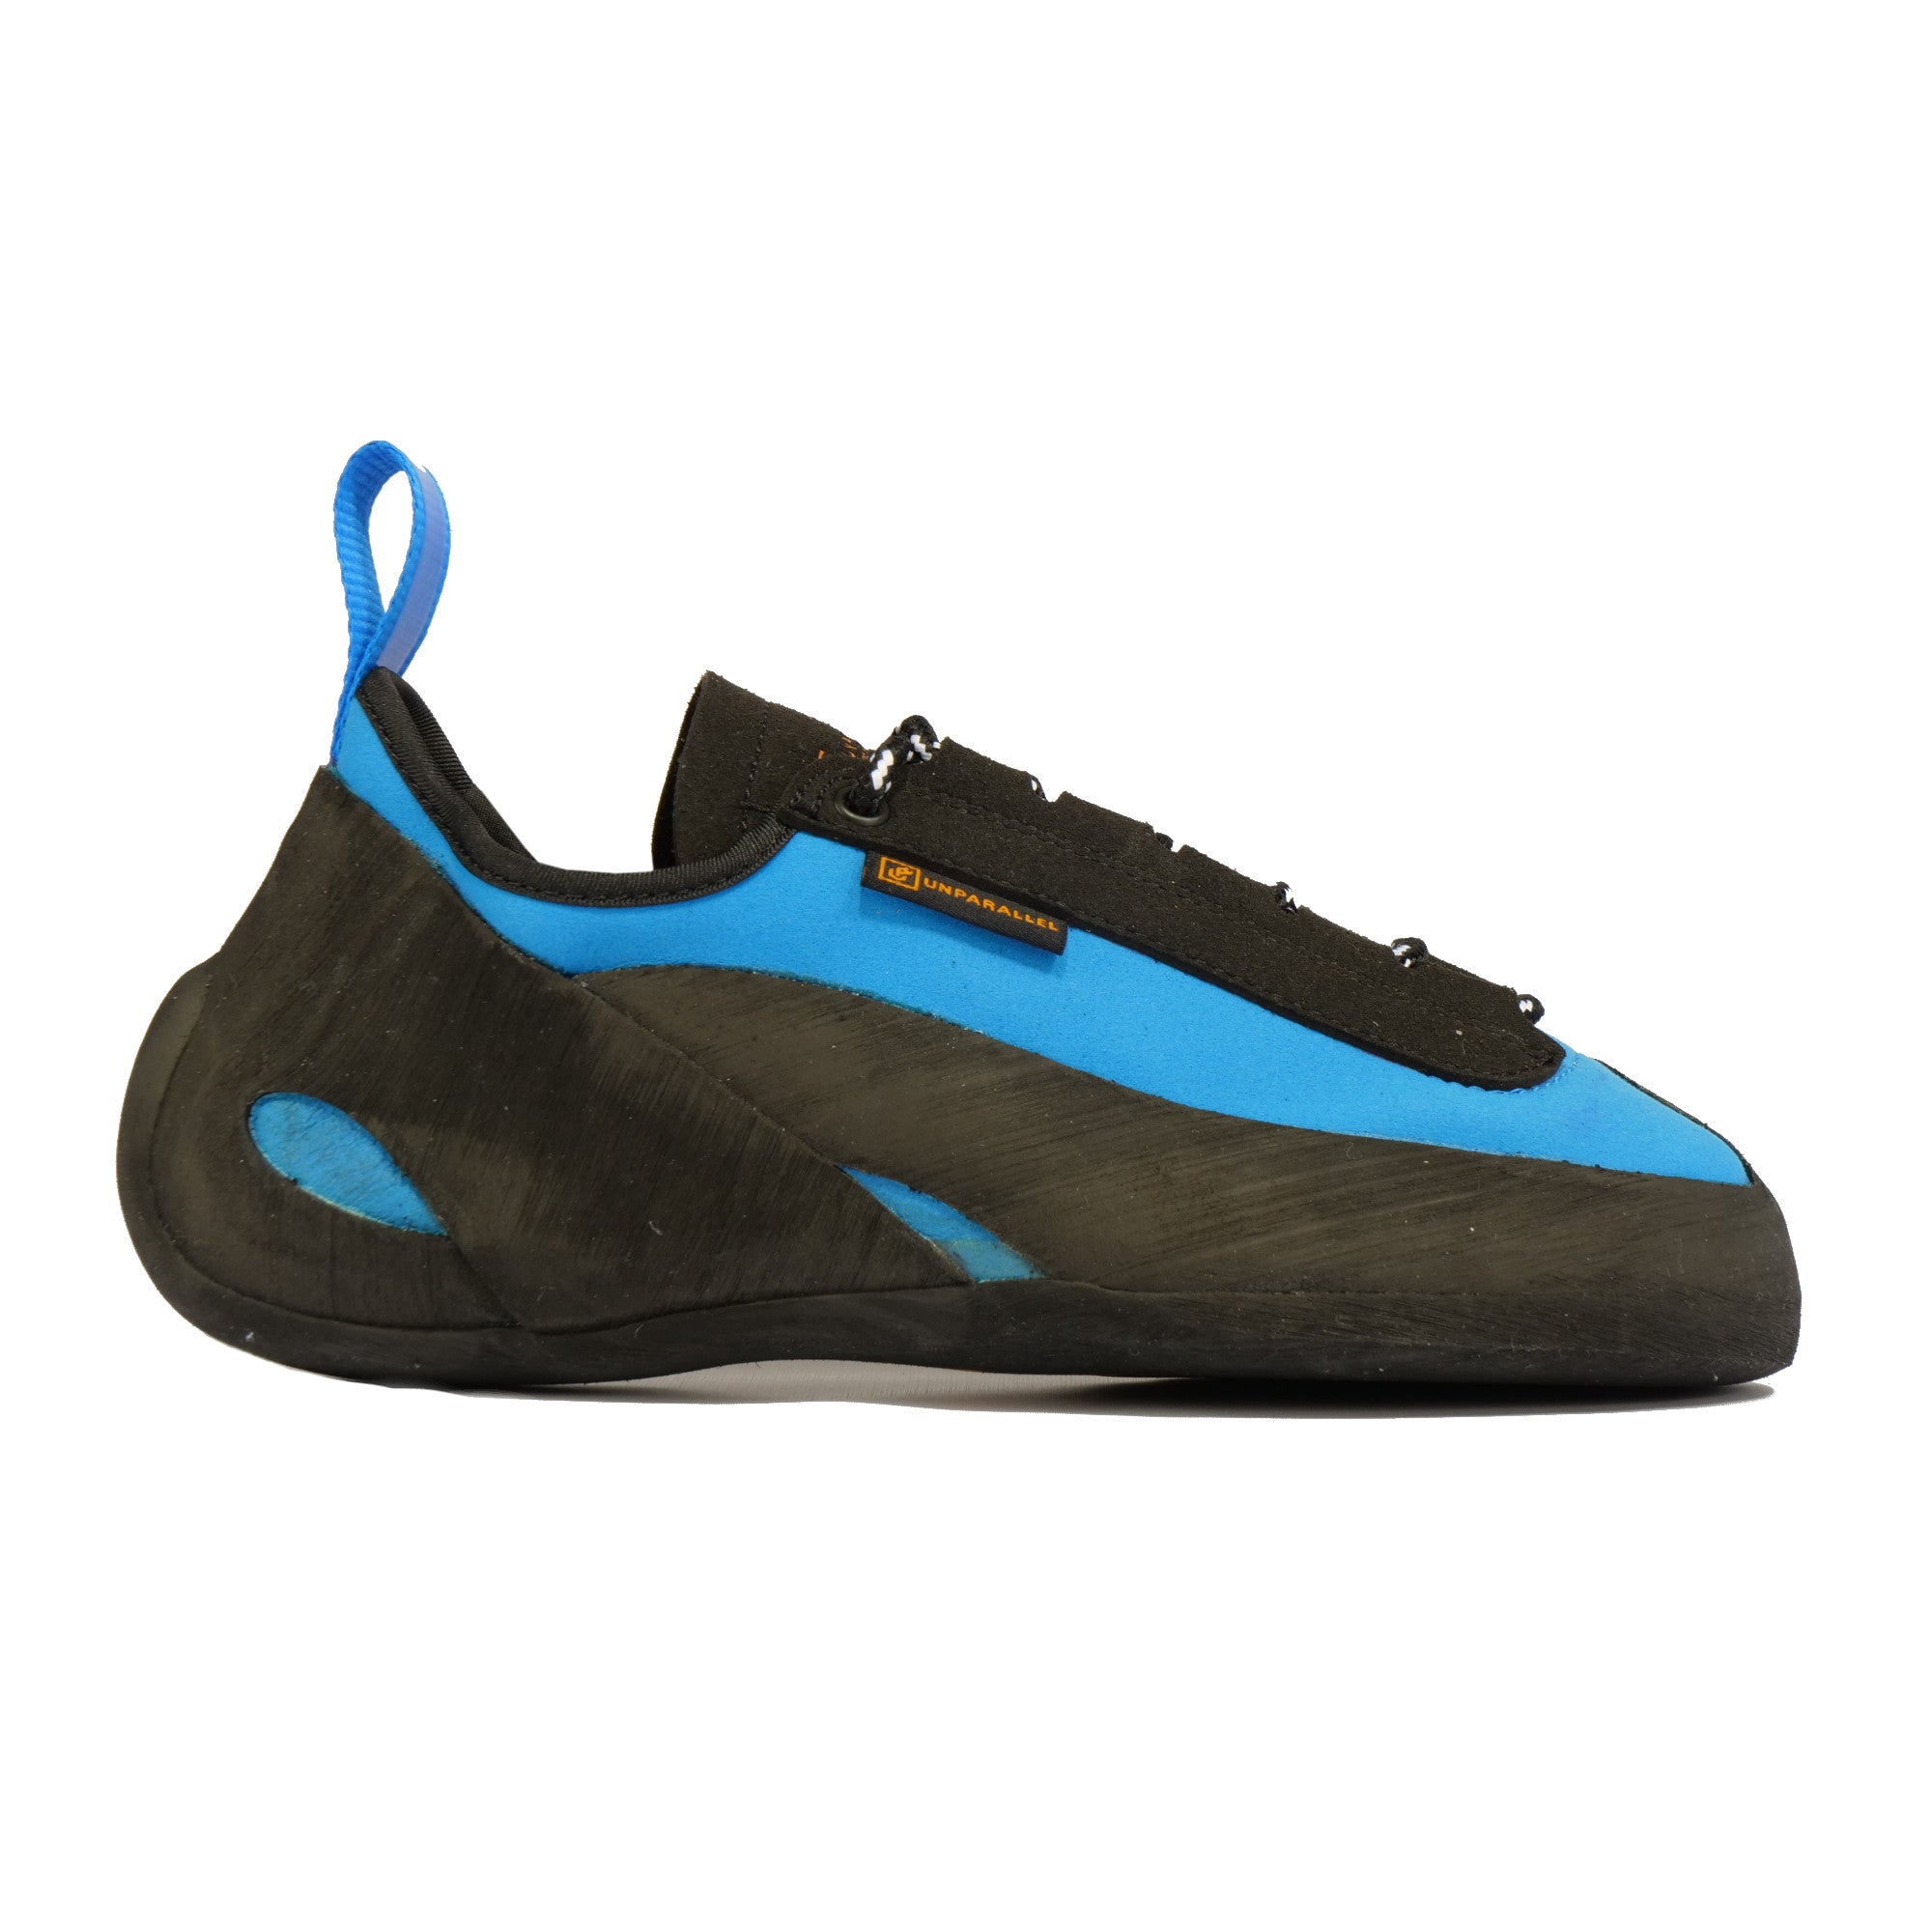 Unparallel Up Lace climbing shoe in Blue and black with rear blue pull tab